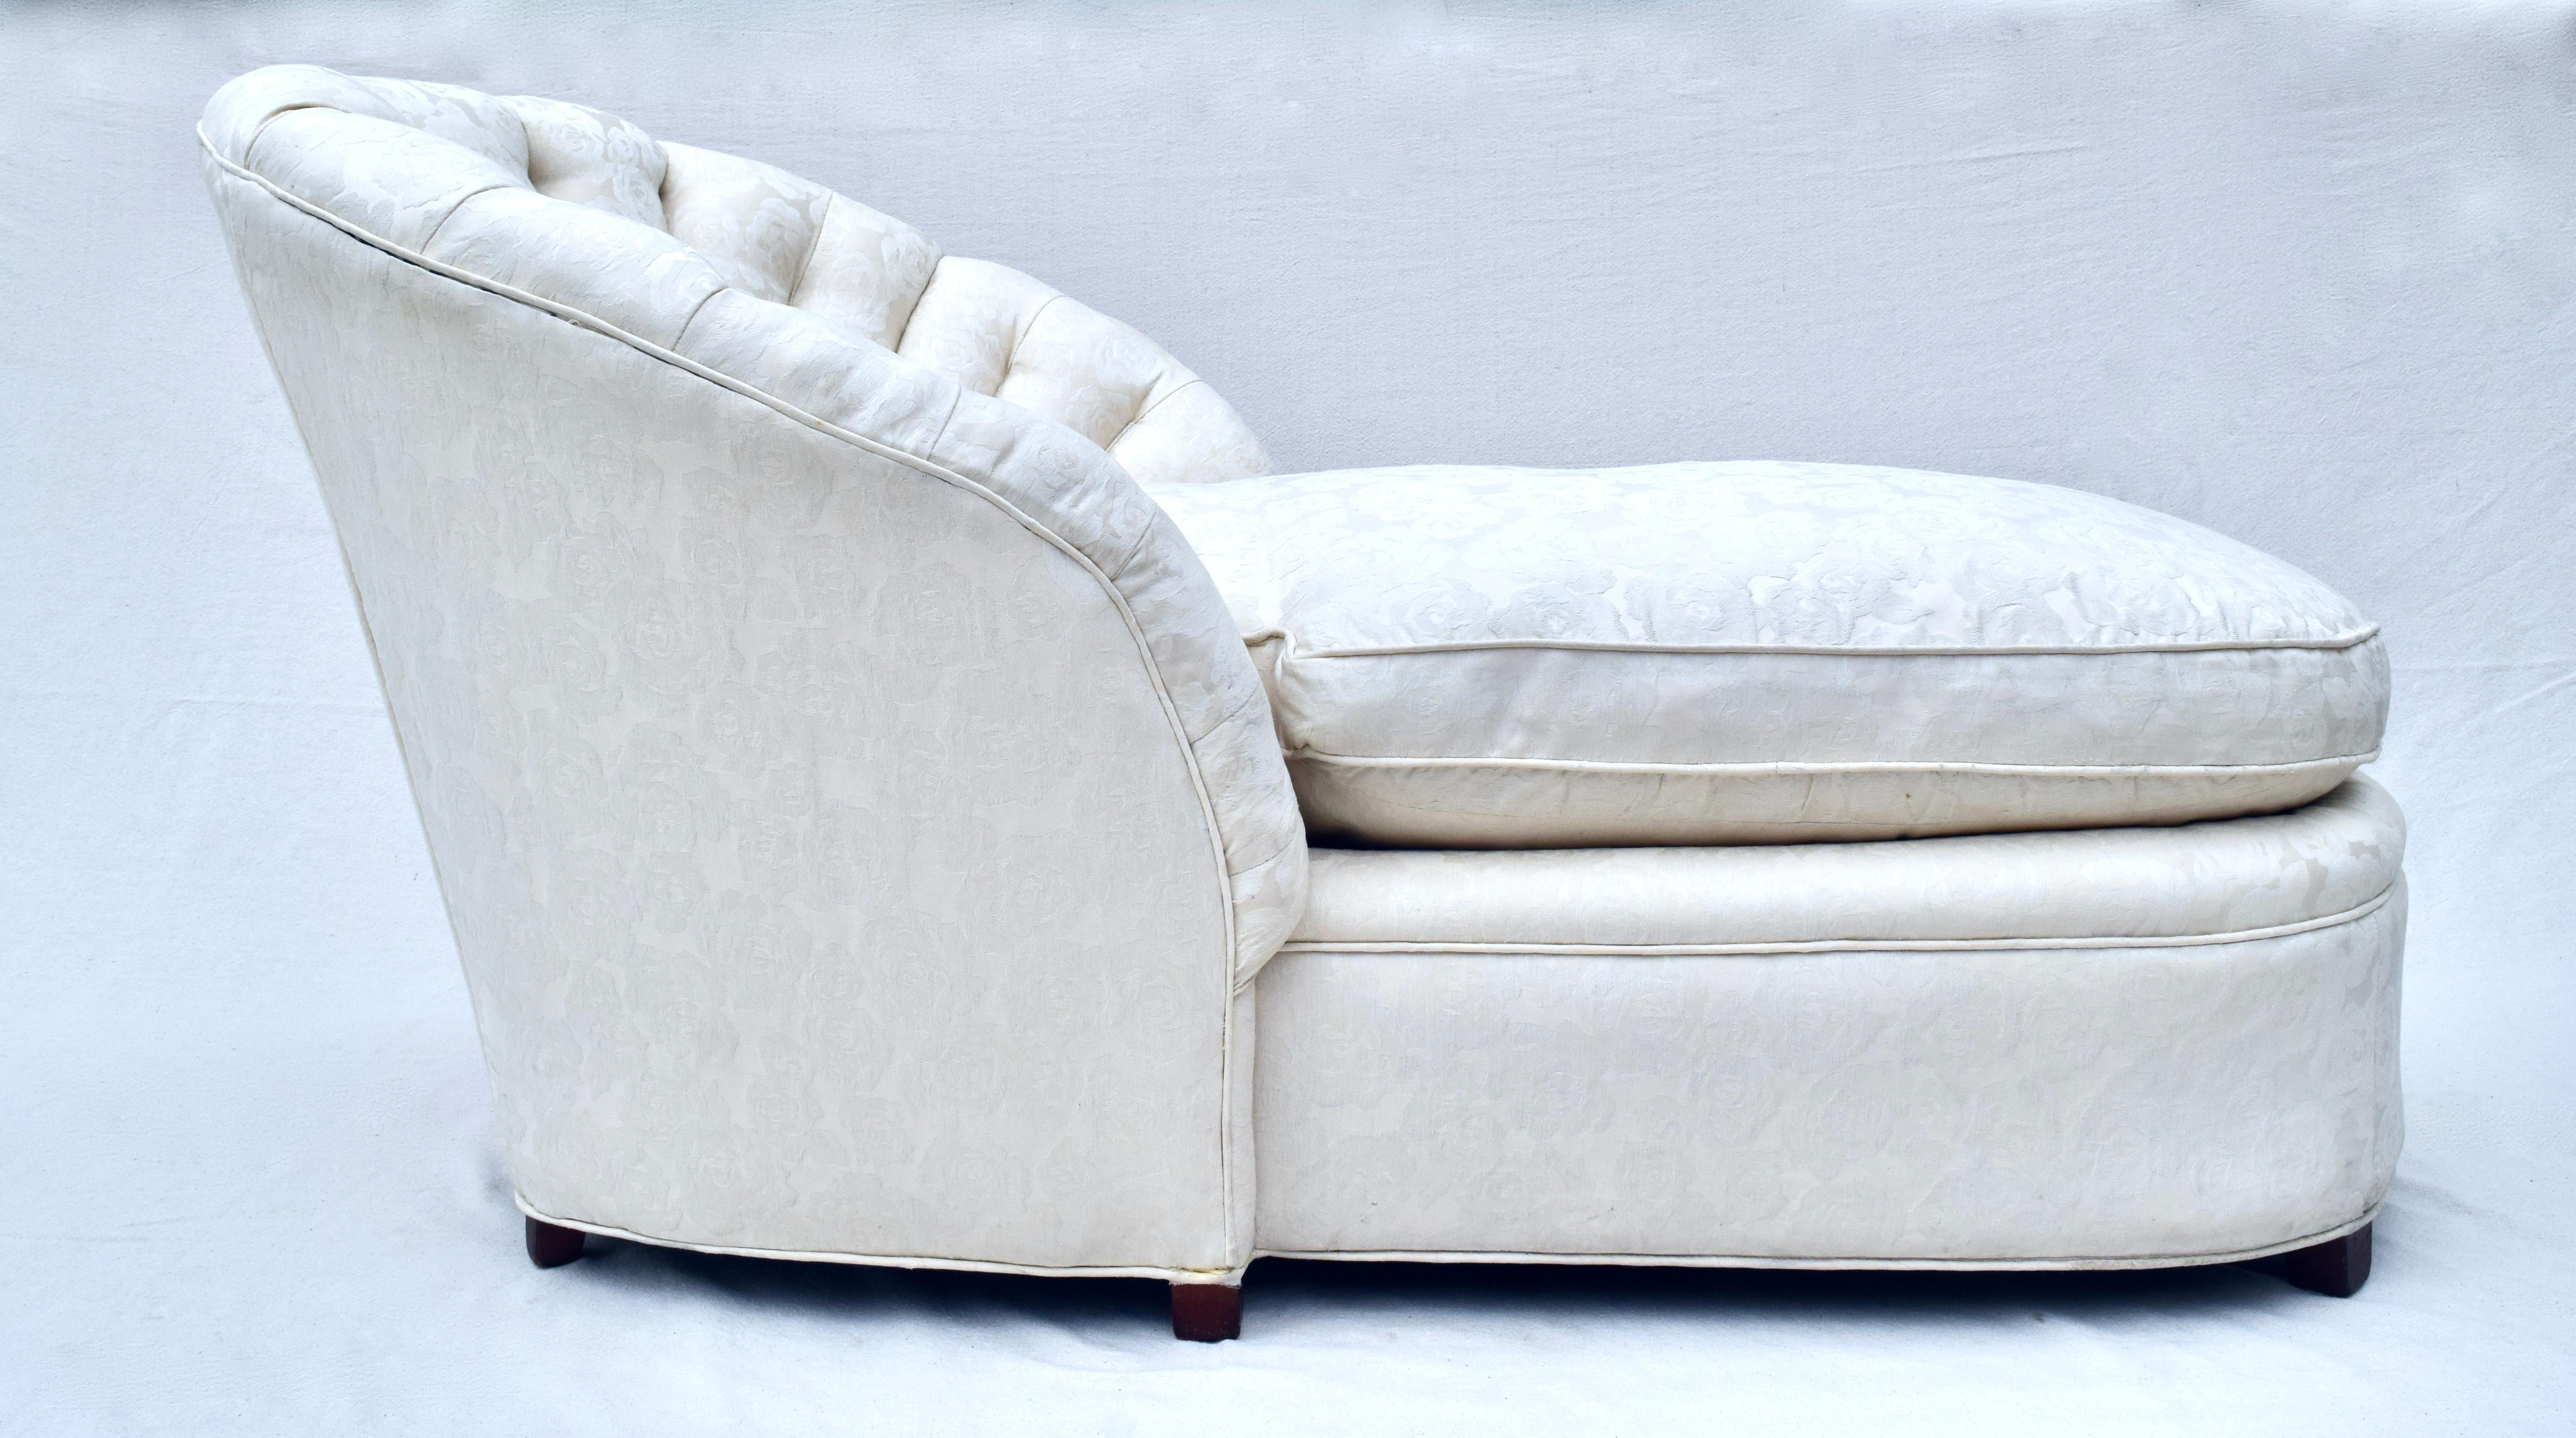 20th Century Scalloped Channel Back Clamshell Form Chaise Lounge